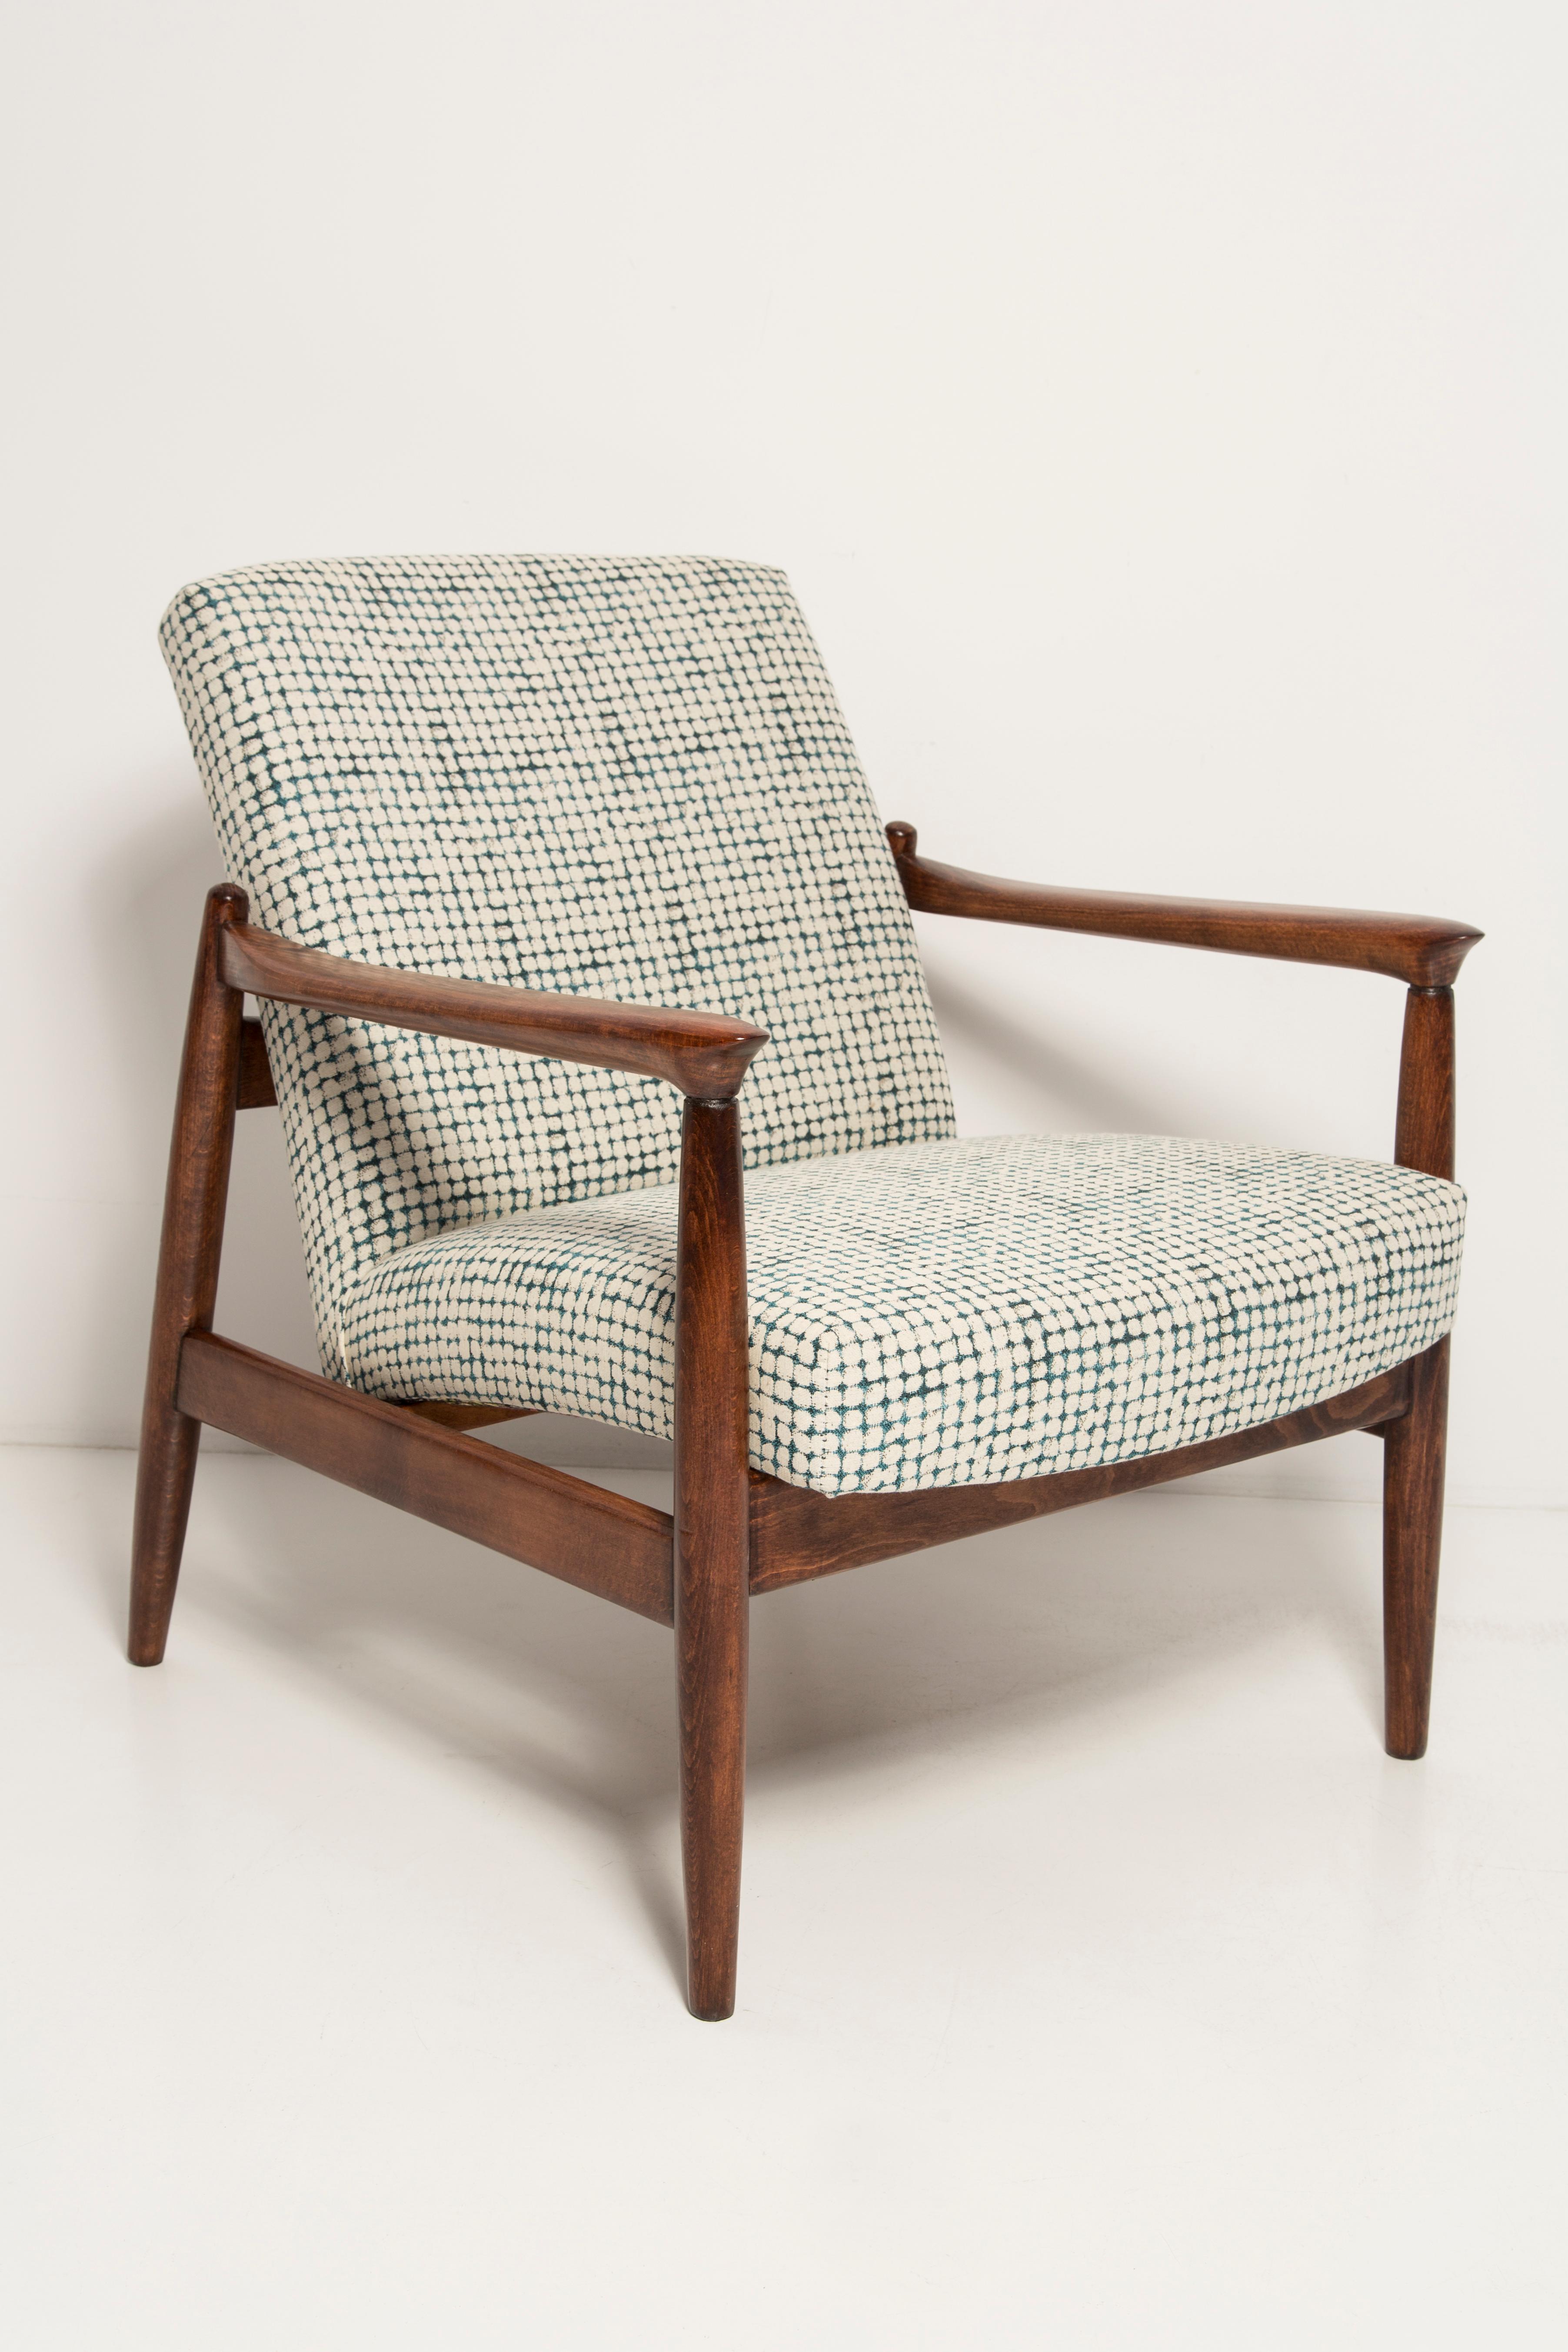 Polish Set of Two Mid Century White and Aqua GFM 64 Armchairs, Edmund Homa, Europe, 1960s For Sale